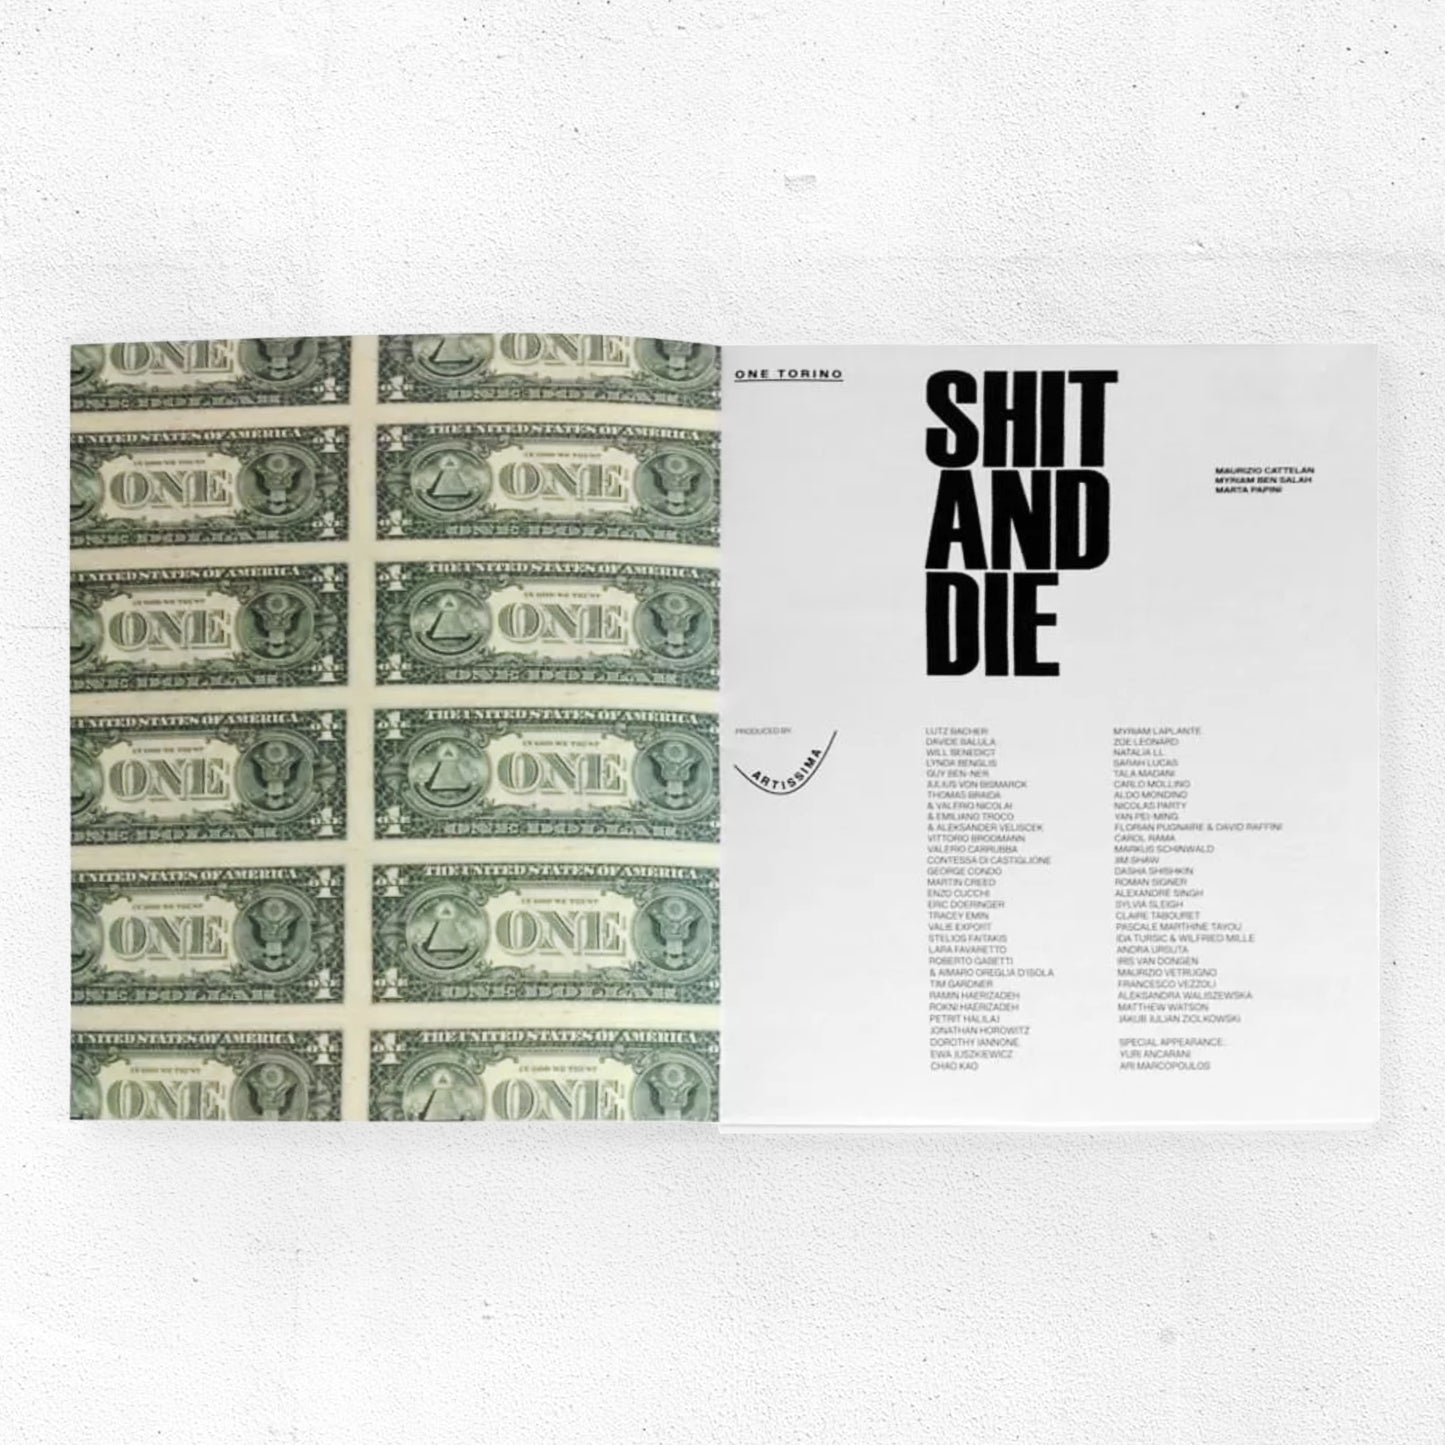 Shit And Die, the exhibition 2015